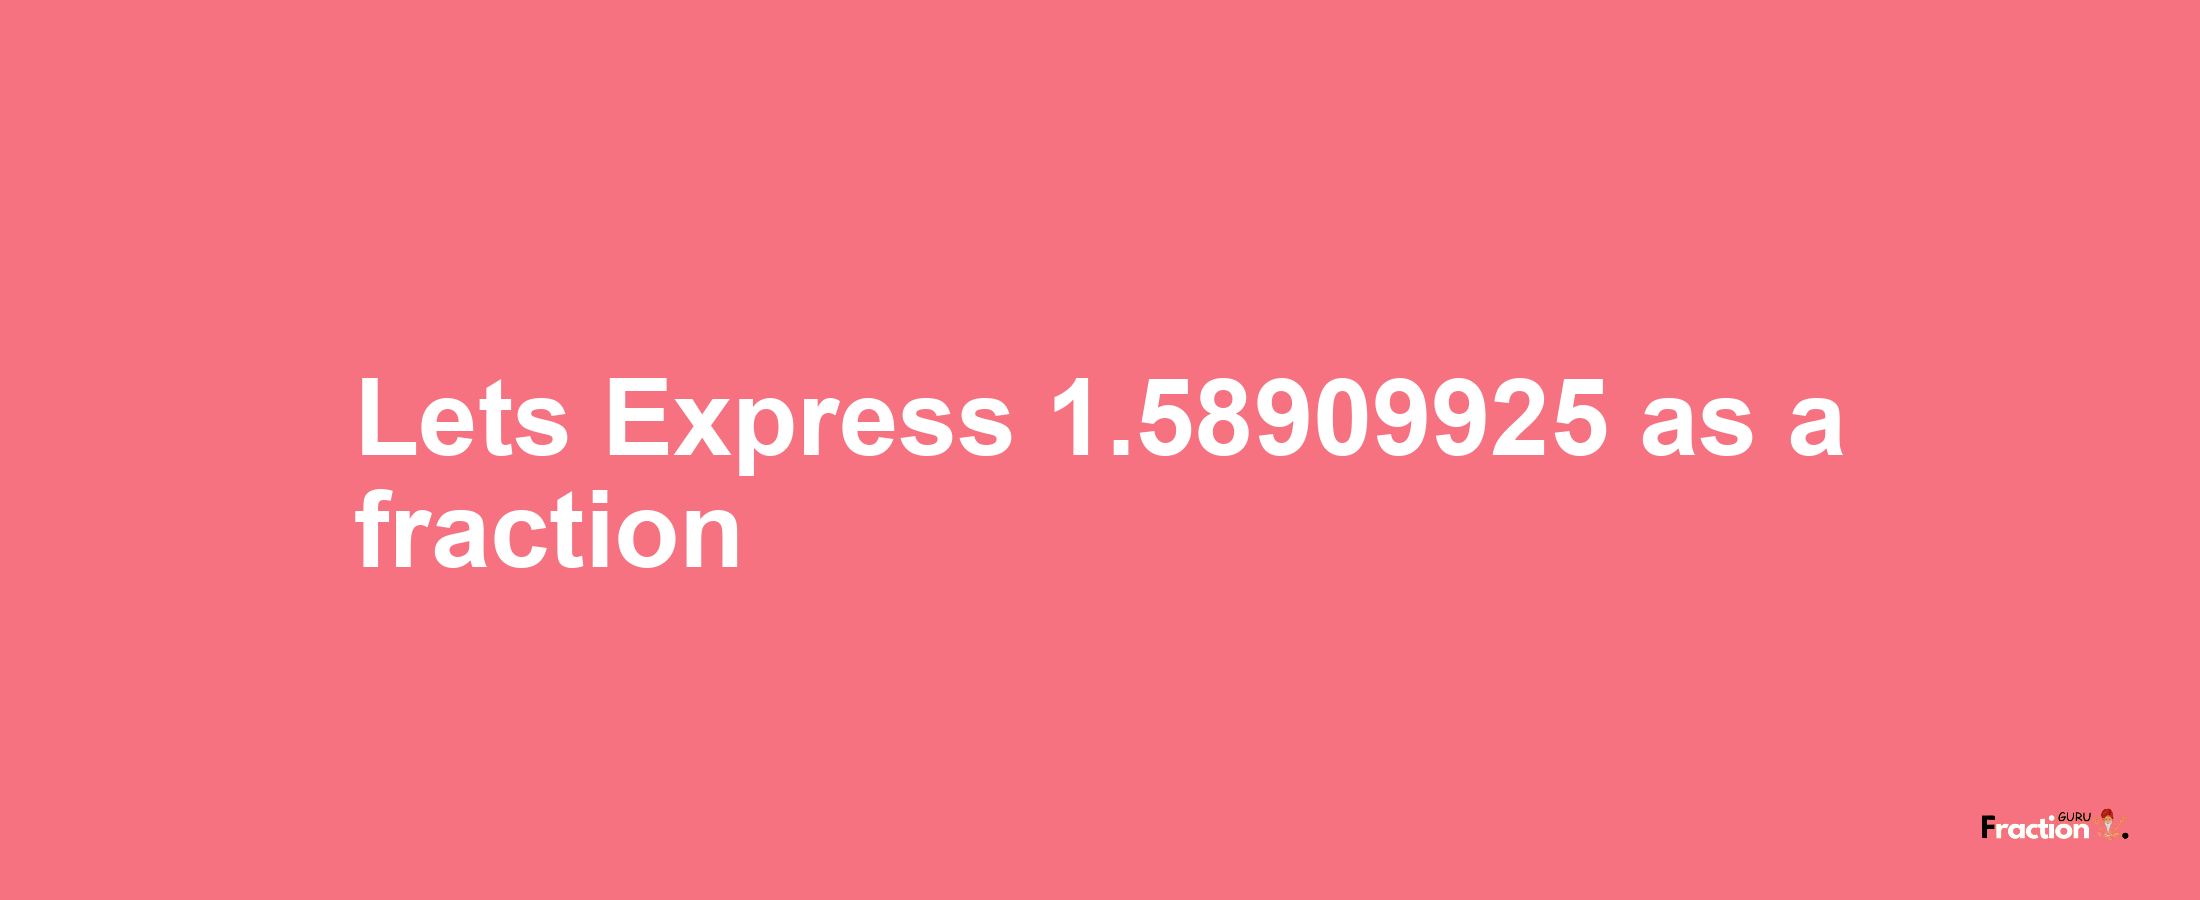 Lets Express 1.58909925 as afraction